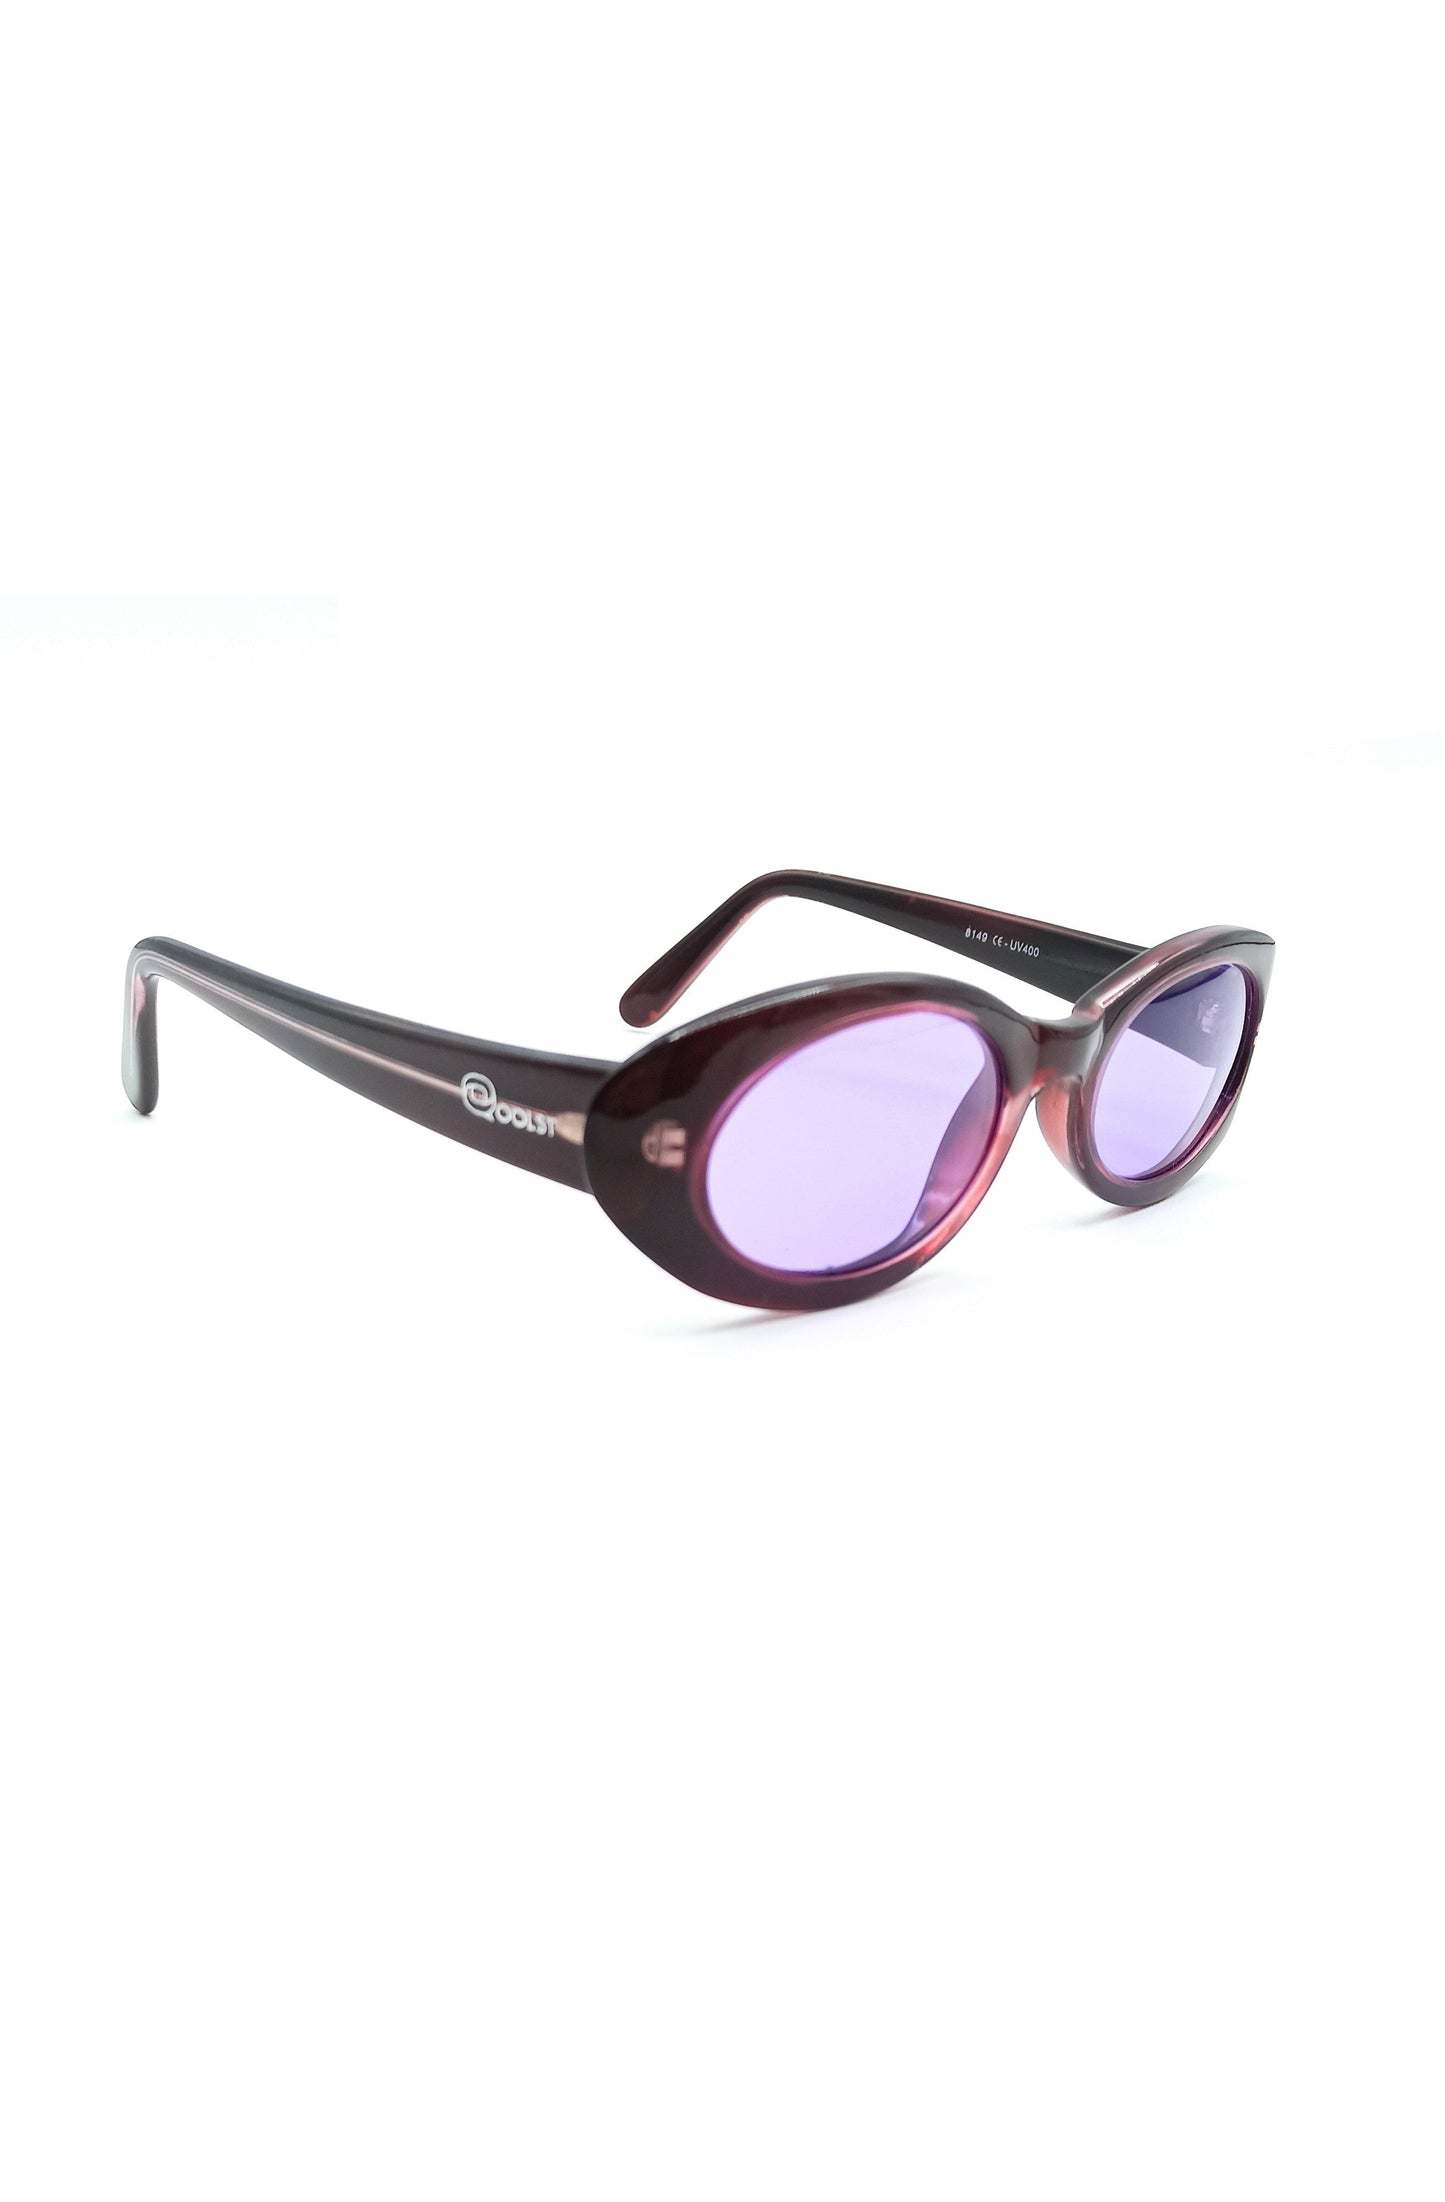 Vintage sunglasses made in Spain for women and men Qoolst Donna C